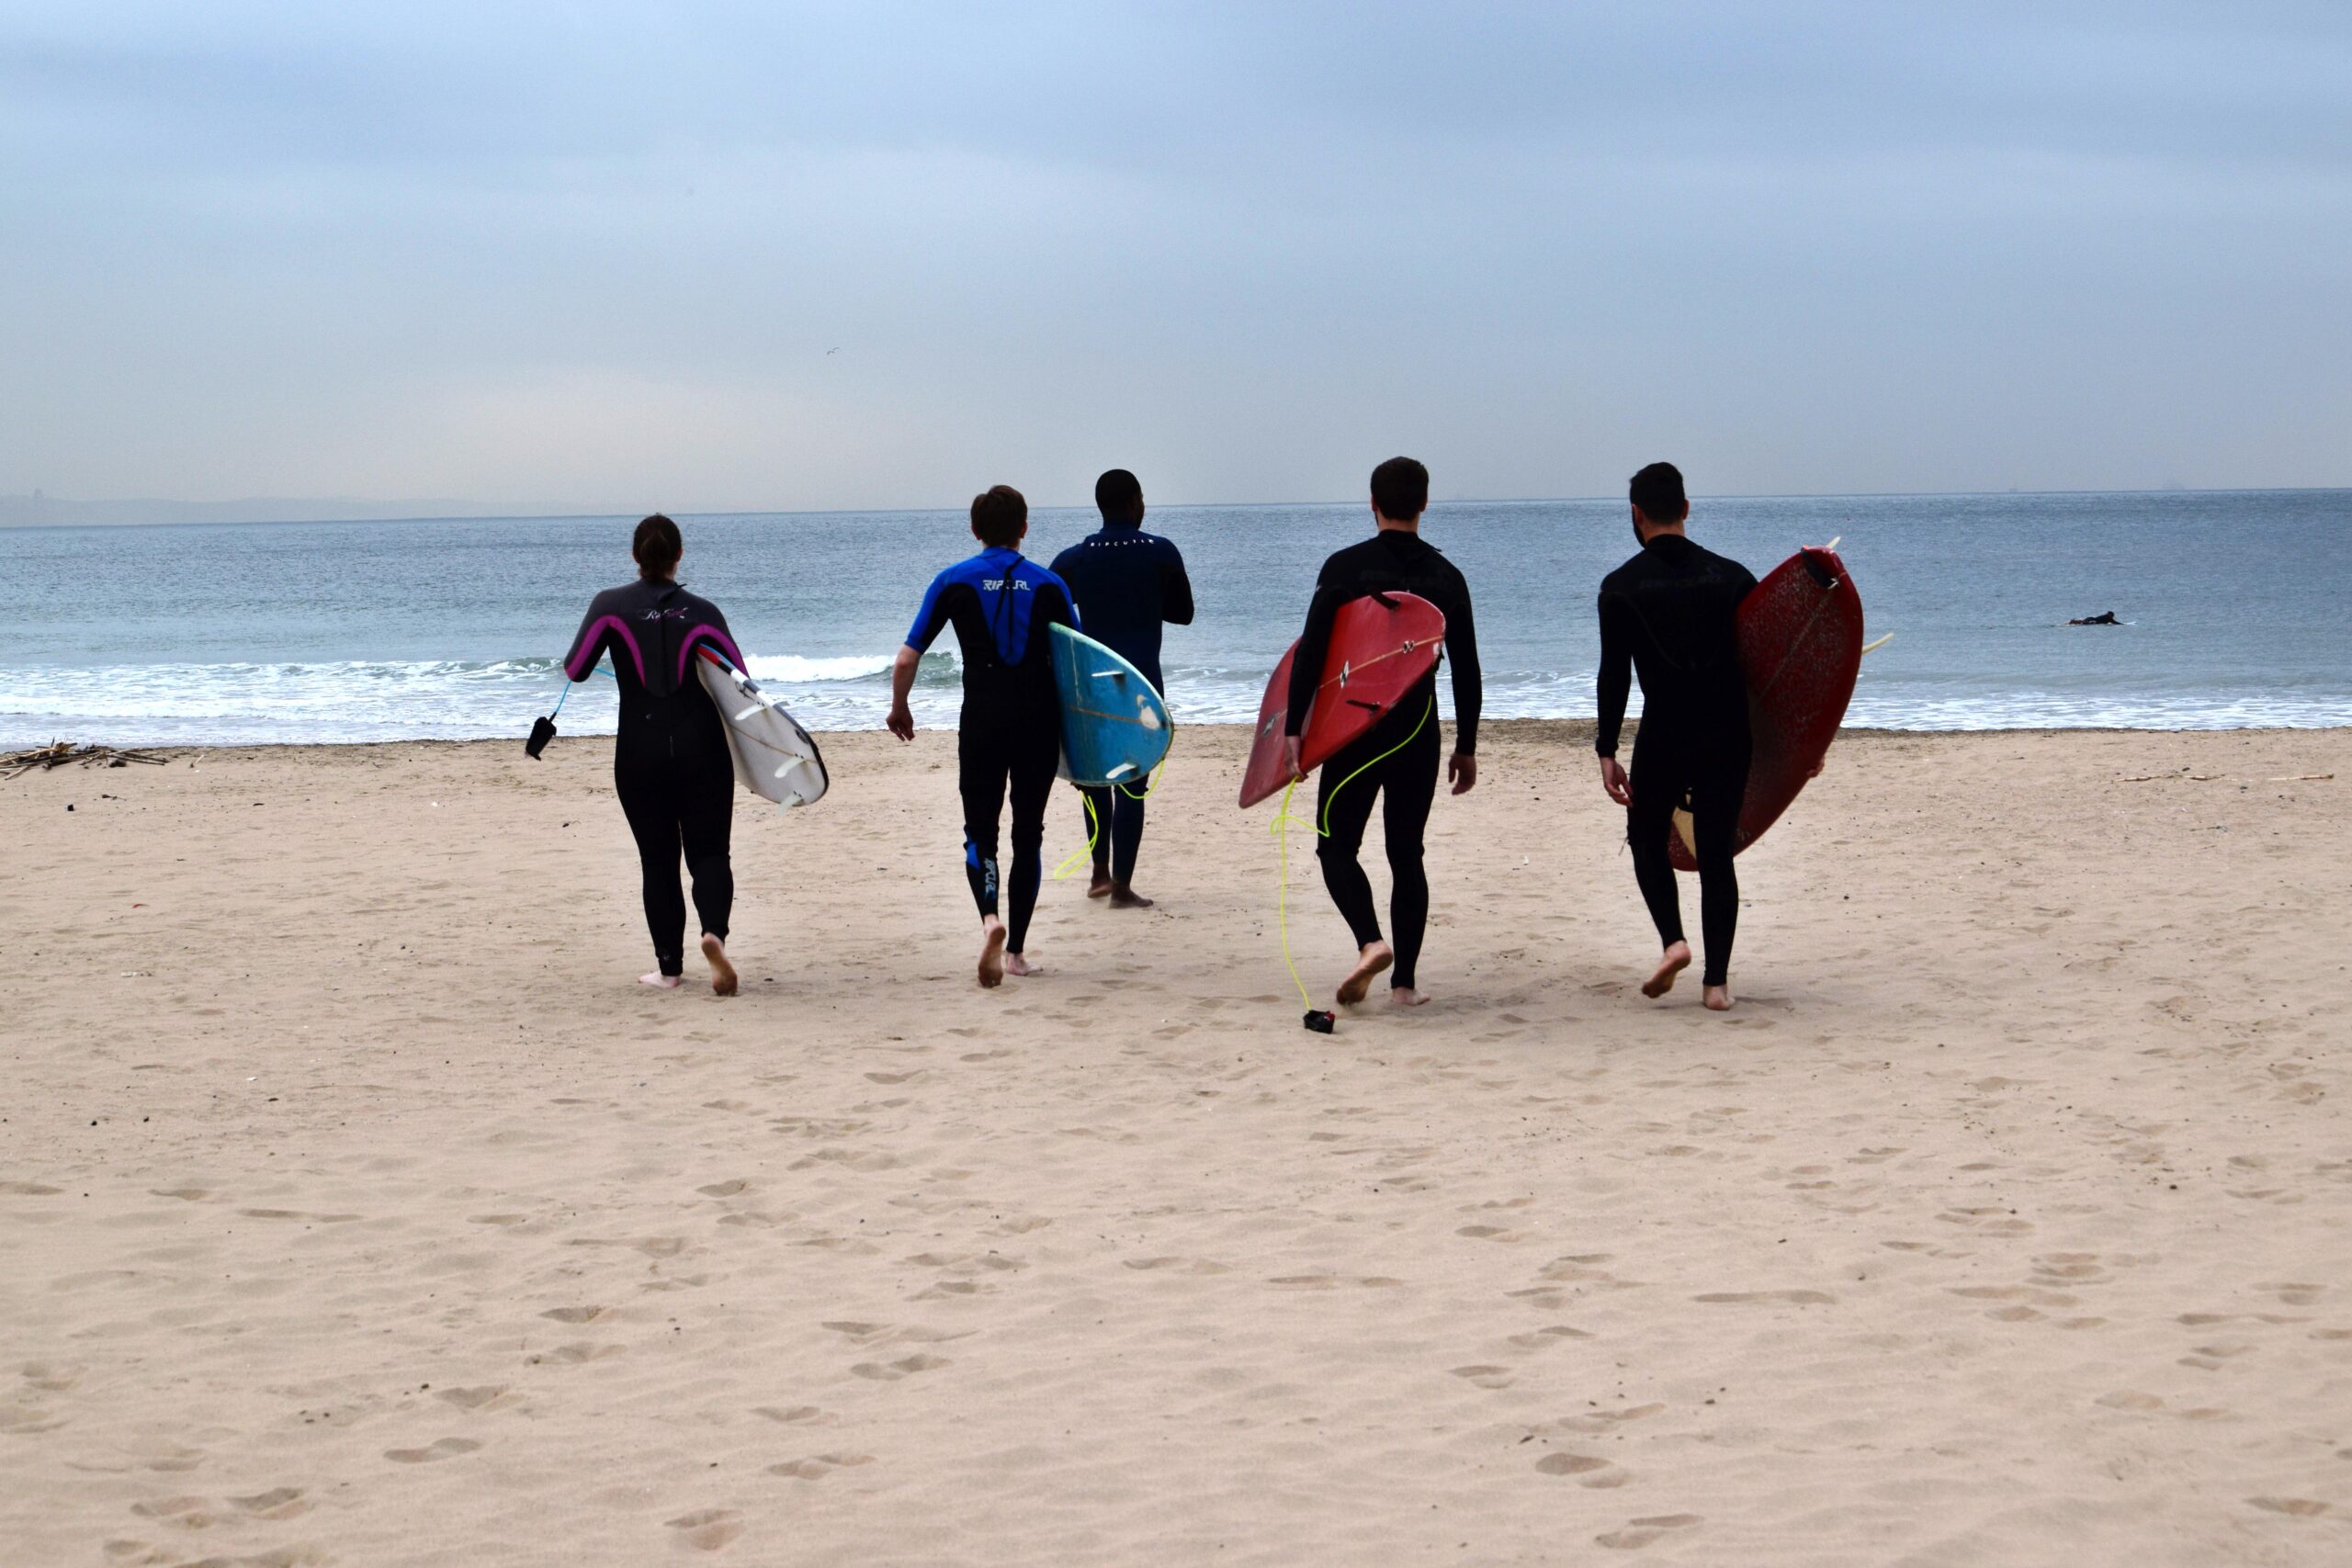 The team heads out for a group surf lesson in Durban, South Africa.